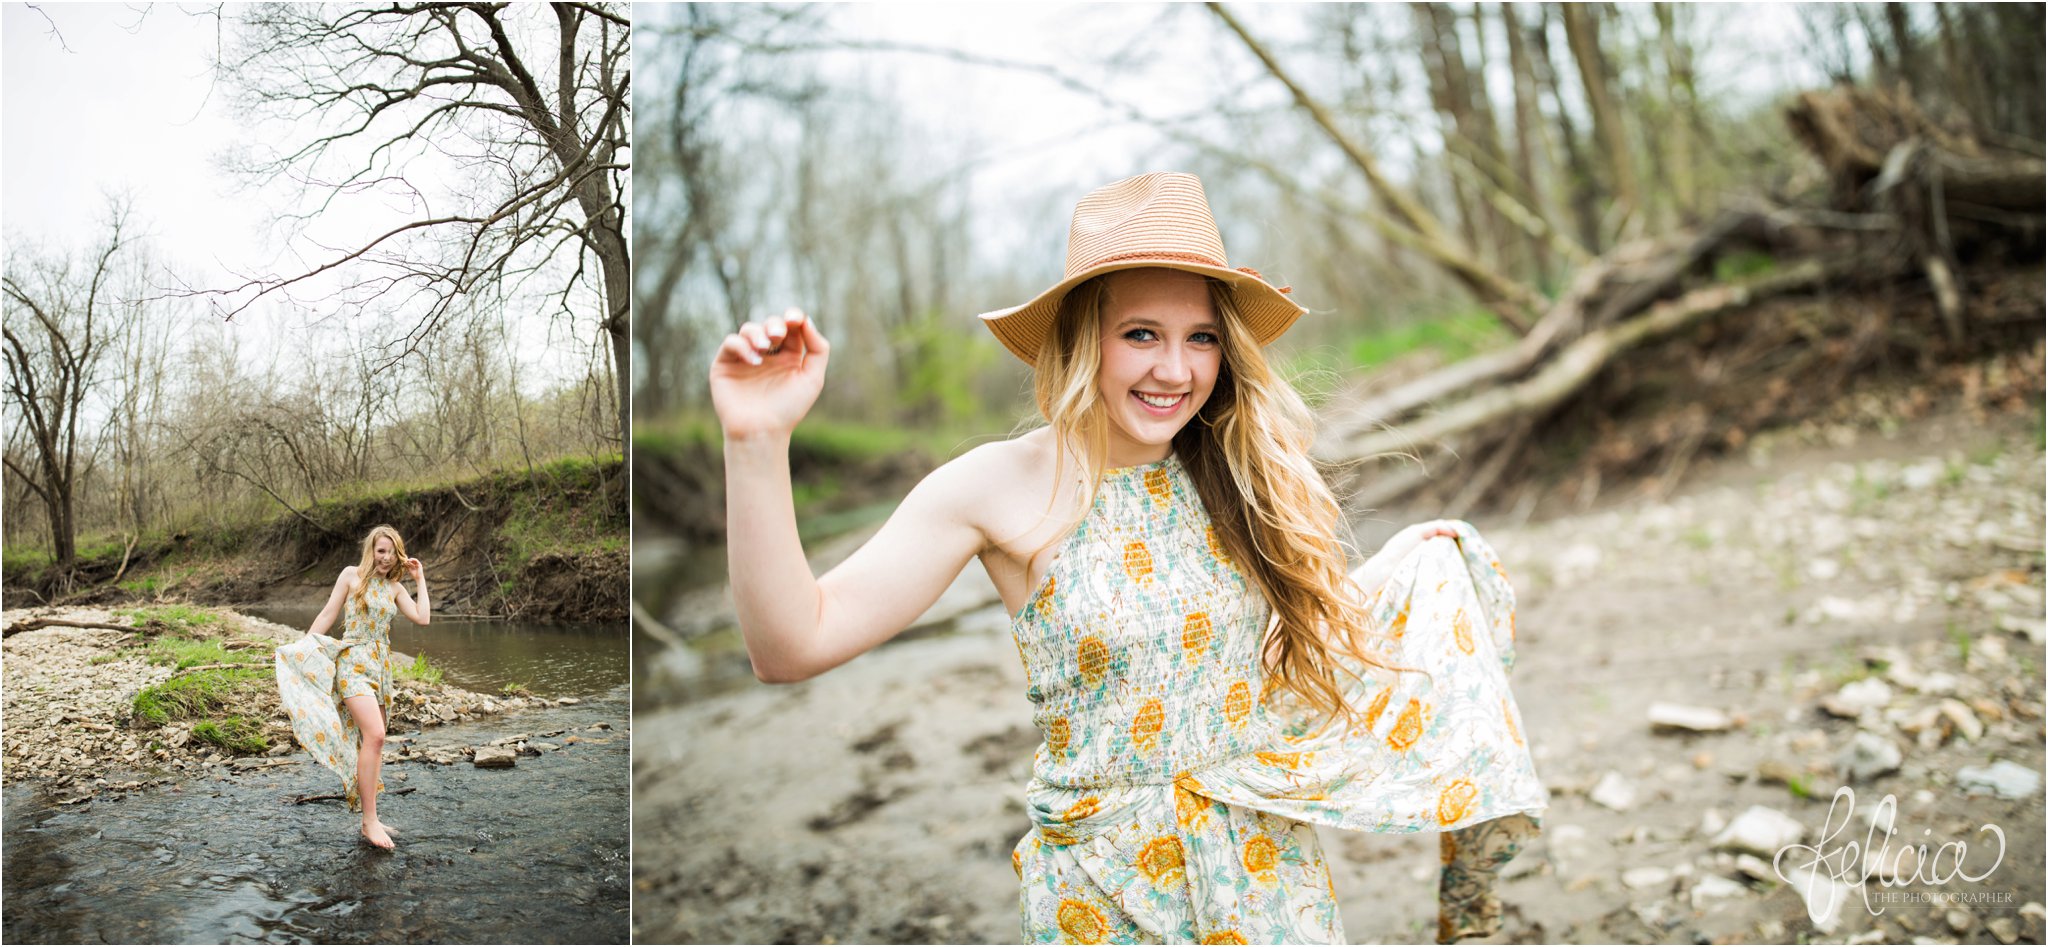 senior pictures | images by feliciathephotographer.com | Kansas City | rustic | long blonde hair | nature background | trees | flower print dress | yellow dress | elegant | dramatic | fedora hat | smiling at camera | walking in stream | barefoot 